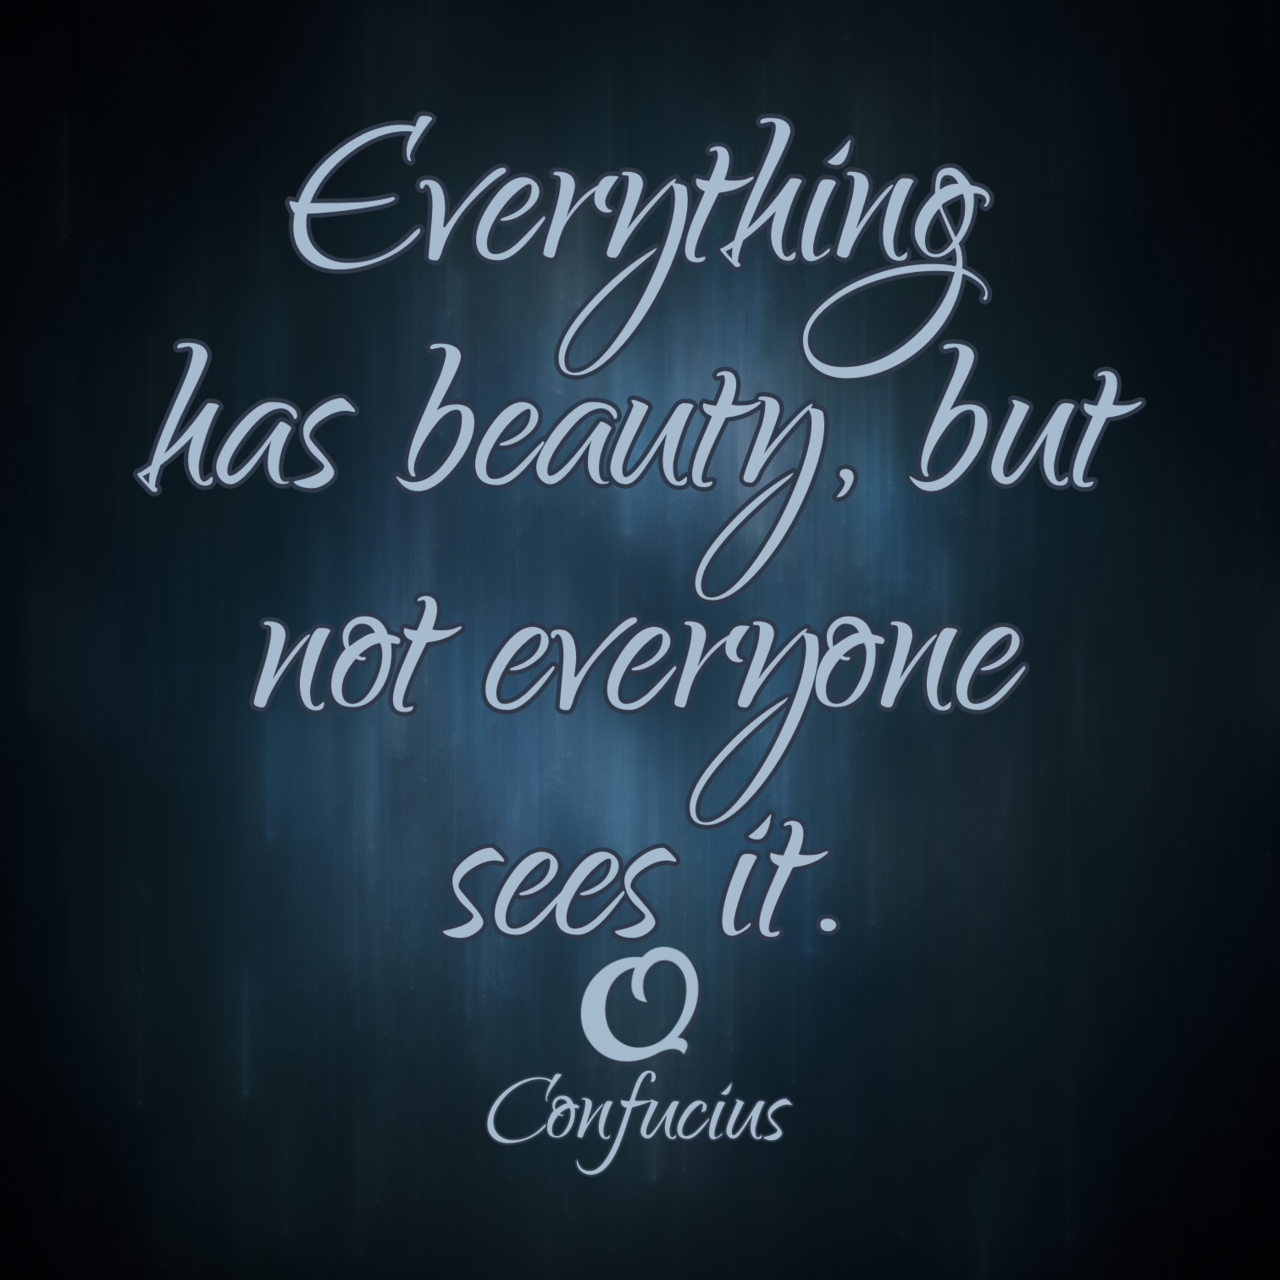 Confucius “Everything has beauty, but not everyone sees it.”